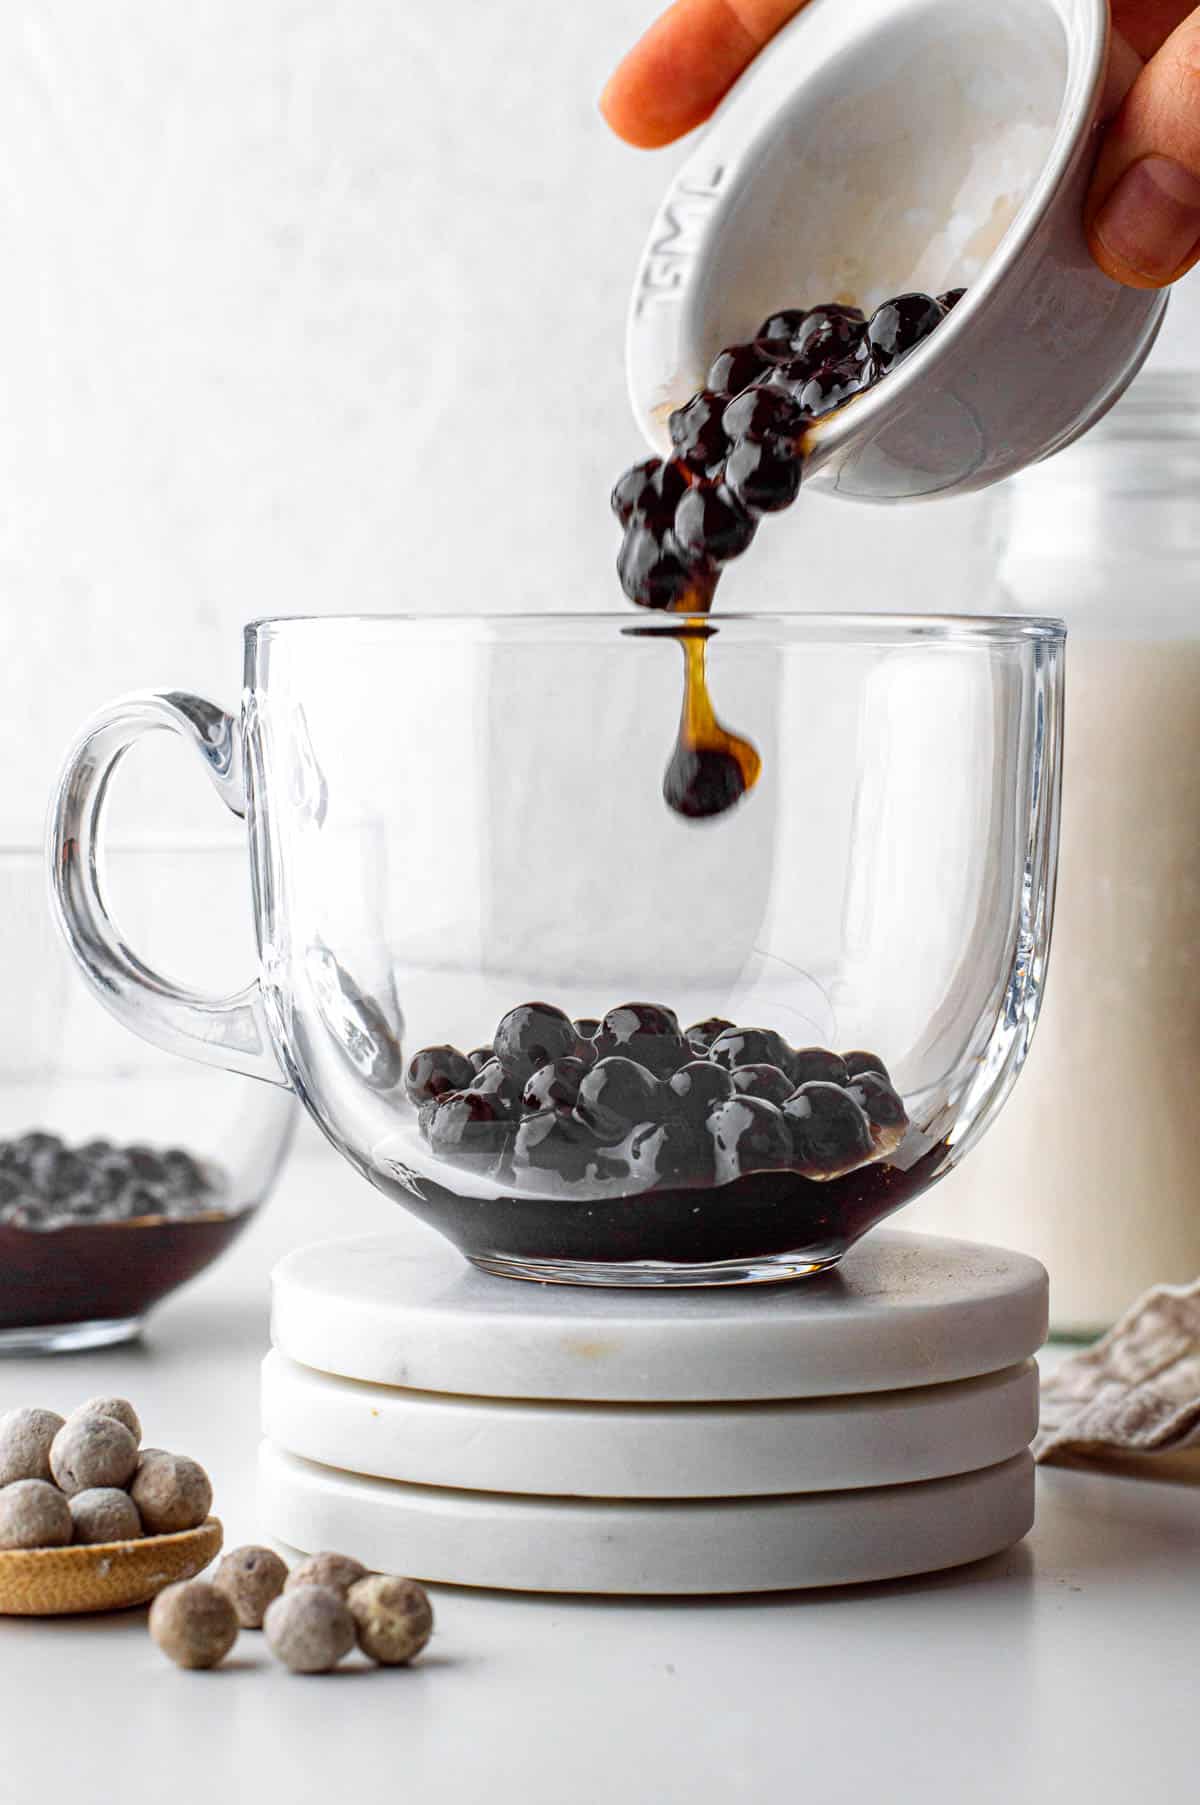 Pouring tapioca pearls from a small white bowl to a large glass.